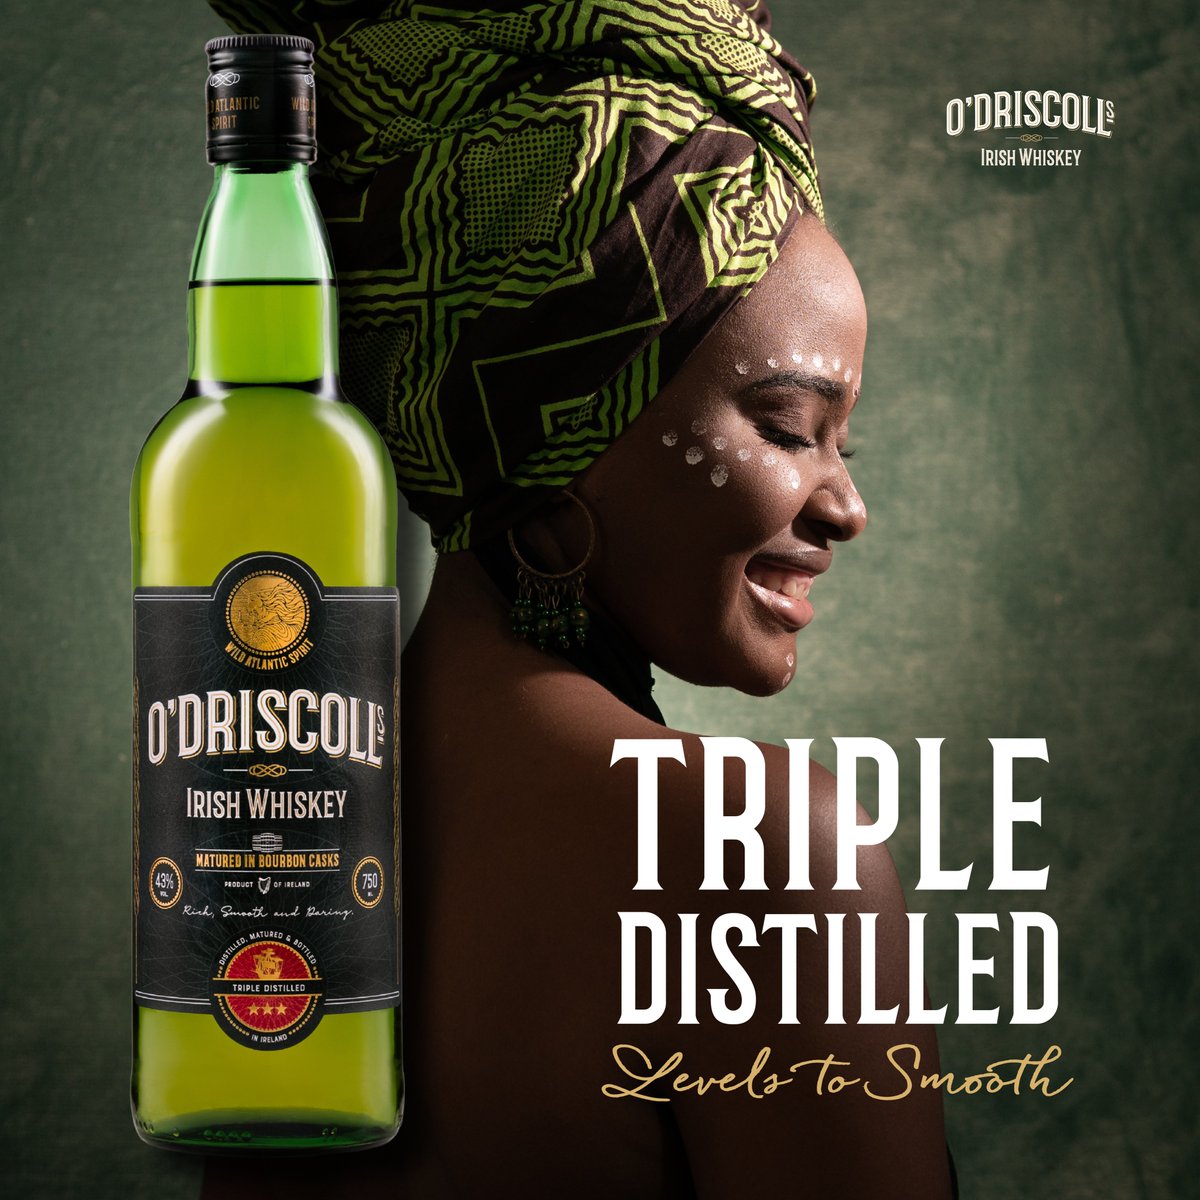 Jambo Kenya! The long-awaited moment is here as O'Driscolls Irish Whiskey lands on Kenyan soil. Cheers to new friendships and triple distilled – Levels to Smooth! 🍀🥃🏴‍☠️ 🖱 Shop Now - odriscollsirishwhiskey.com #odriscollsirishwhiskey #weareallodriscolls #drinkresponsibly